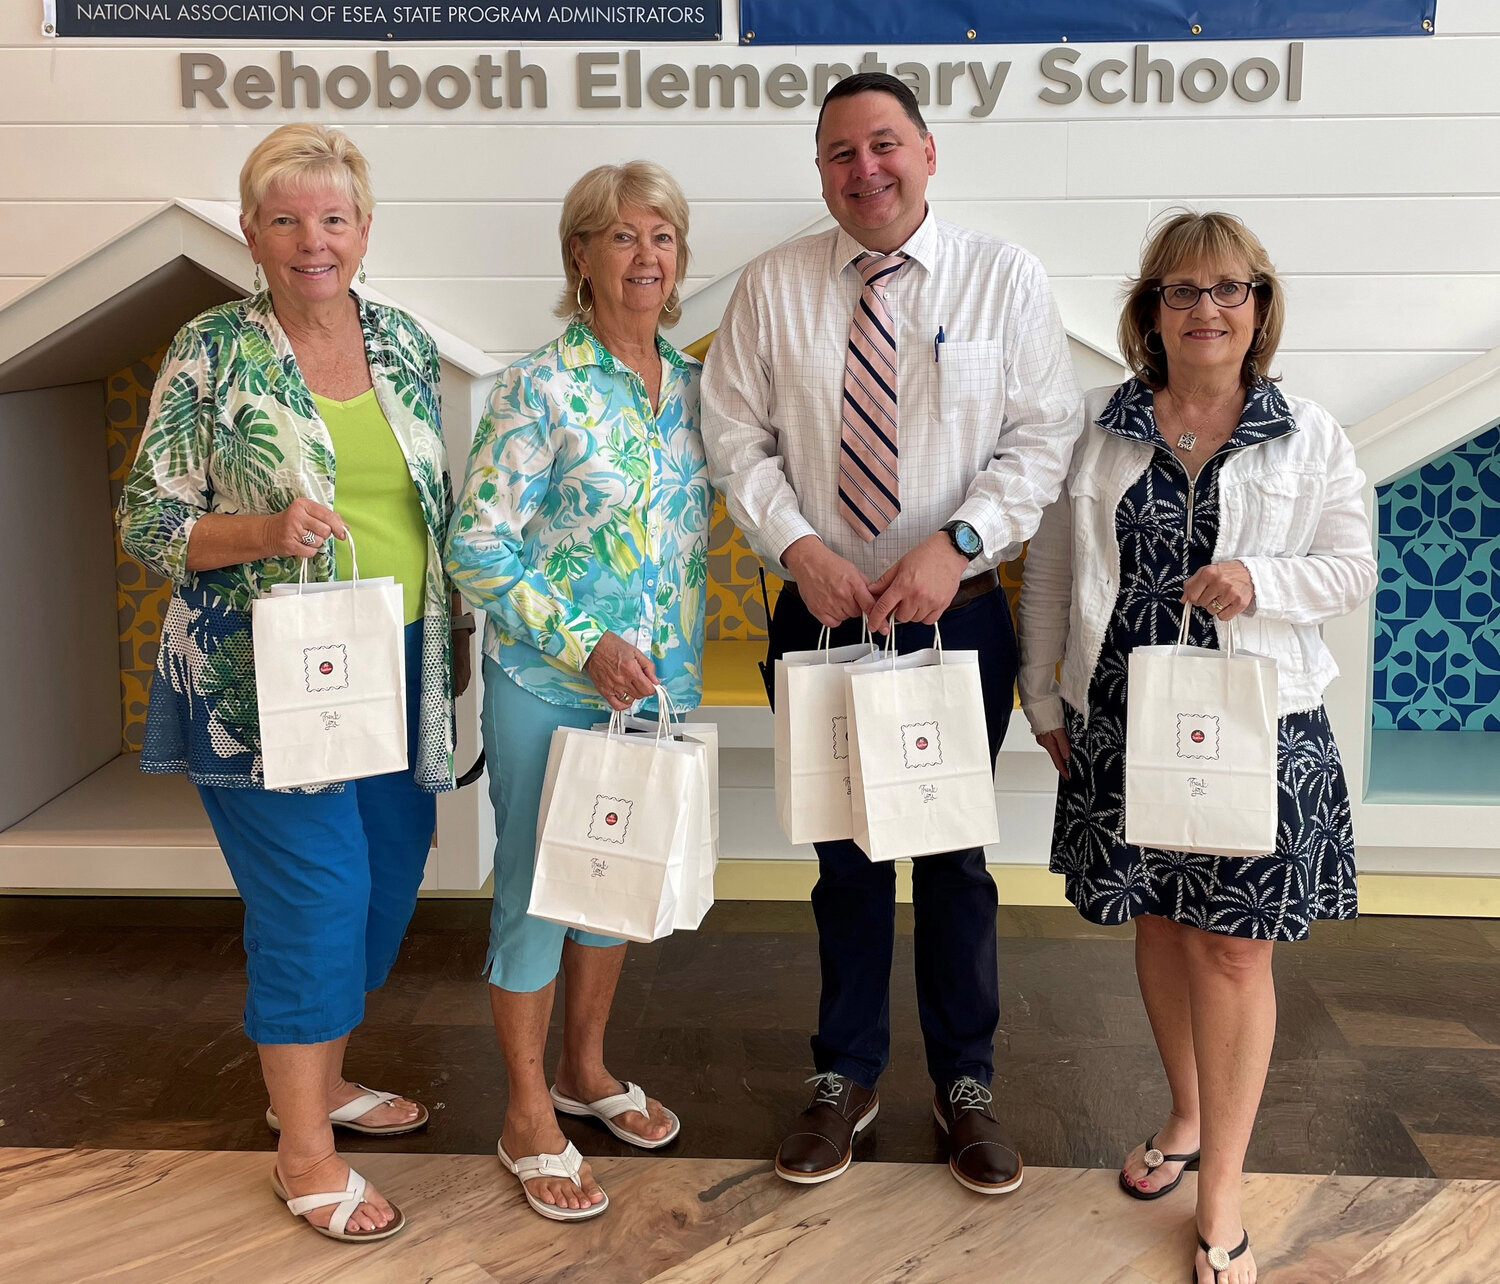 Rehoboth Beach Village Improvement Association delivered donations to Rehoboth Elementary School. From left, Diane Baerveldt, Lin Waggoner, Assistant Principal Kevin Monaghan and Kathy Jacobs.